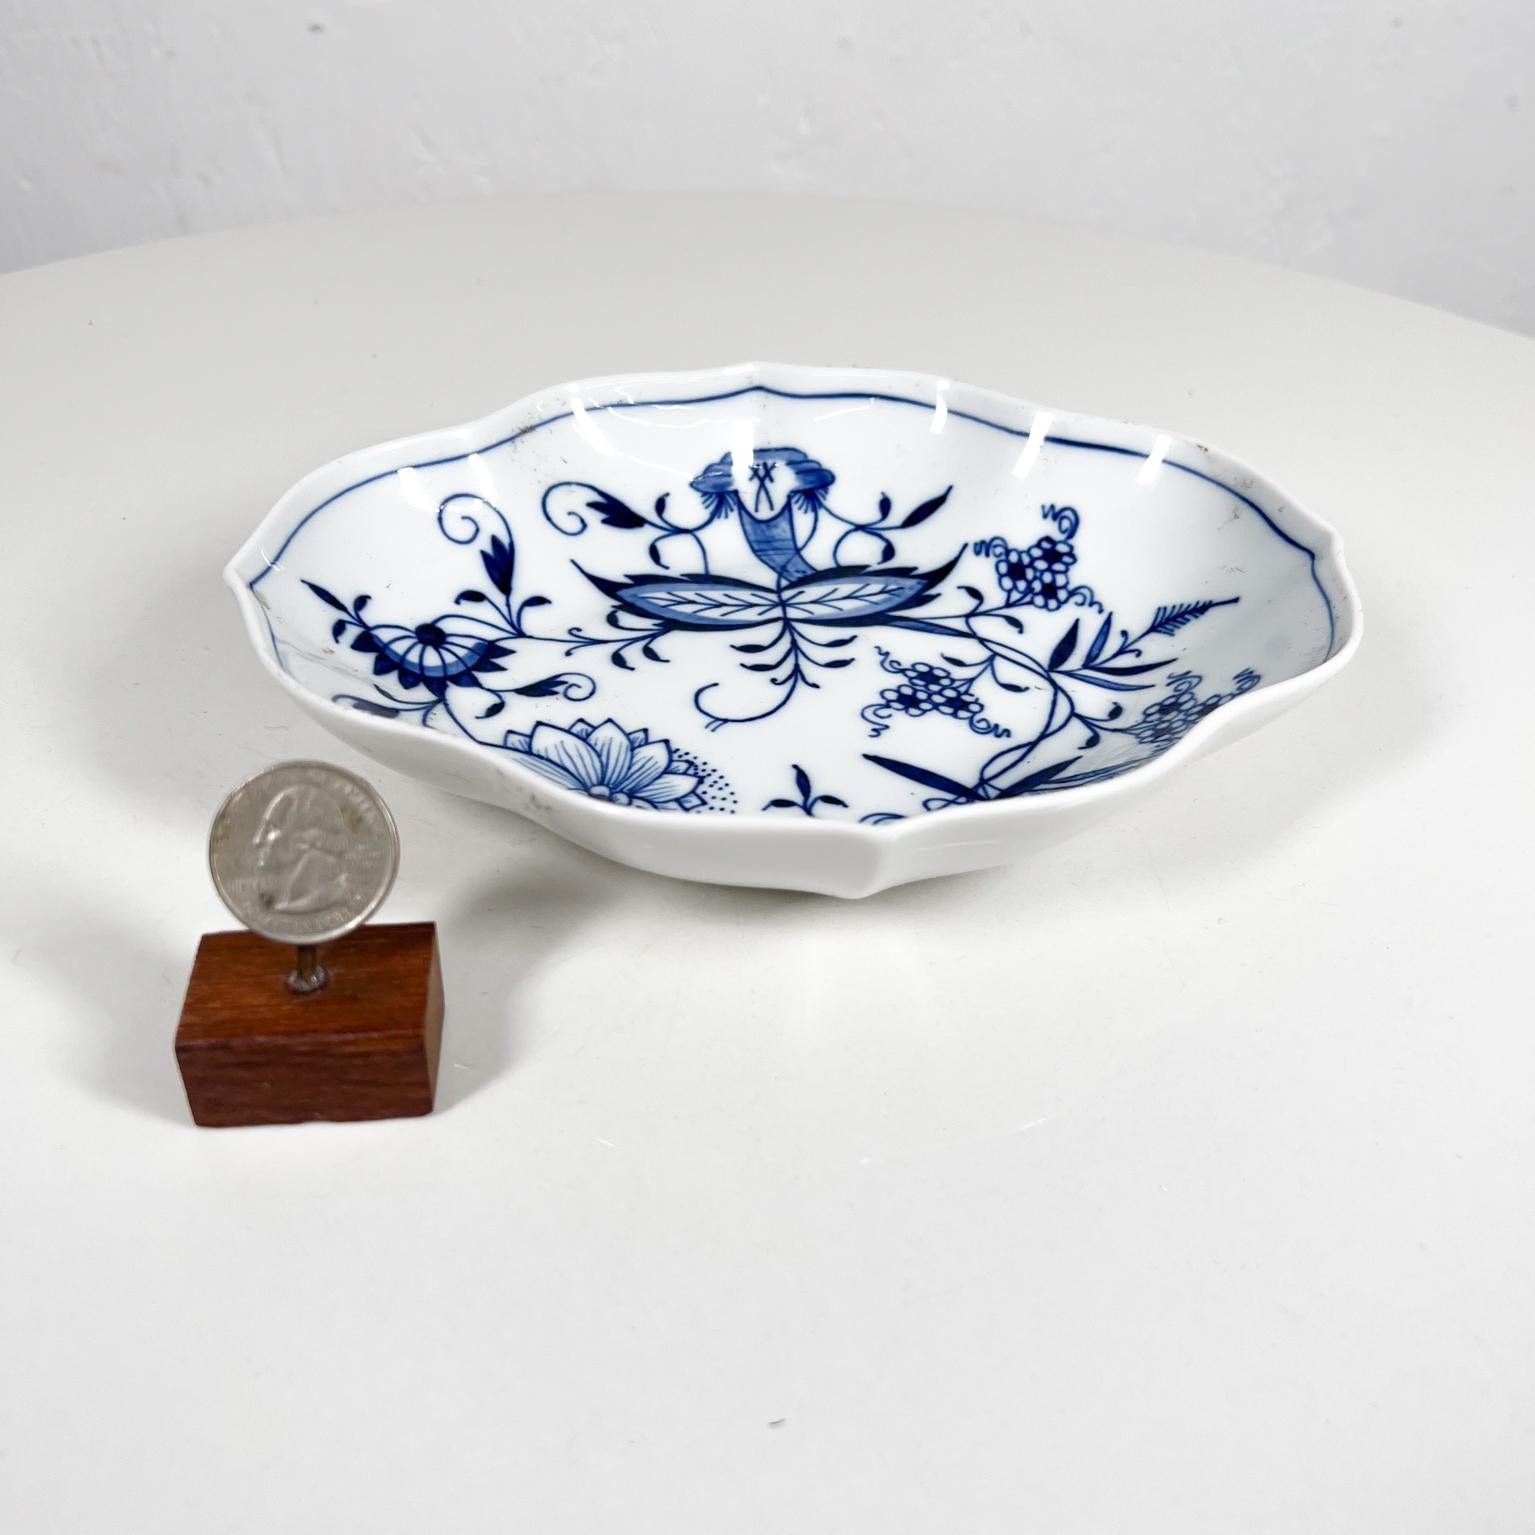 1950s Oval Tray Pickle Dish Radiant Blue Onion Meissen Zwiebelmuster
5.75 x 7.5 x 1.5 h
Radiant Blue Porcelain Onion Pattern
Preowned Original good vintage condition.
See all images provided.